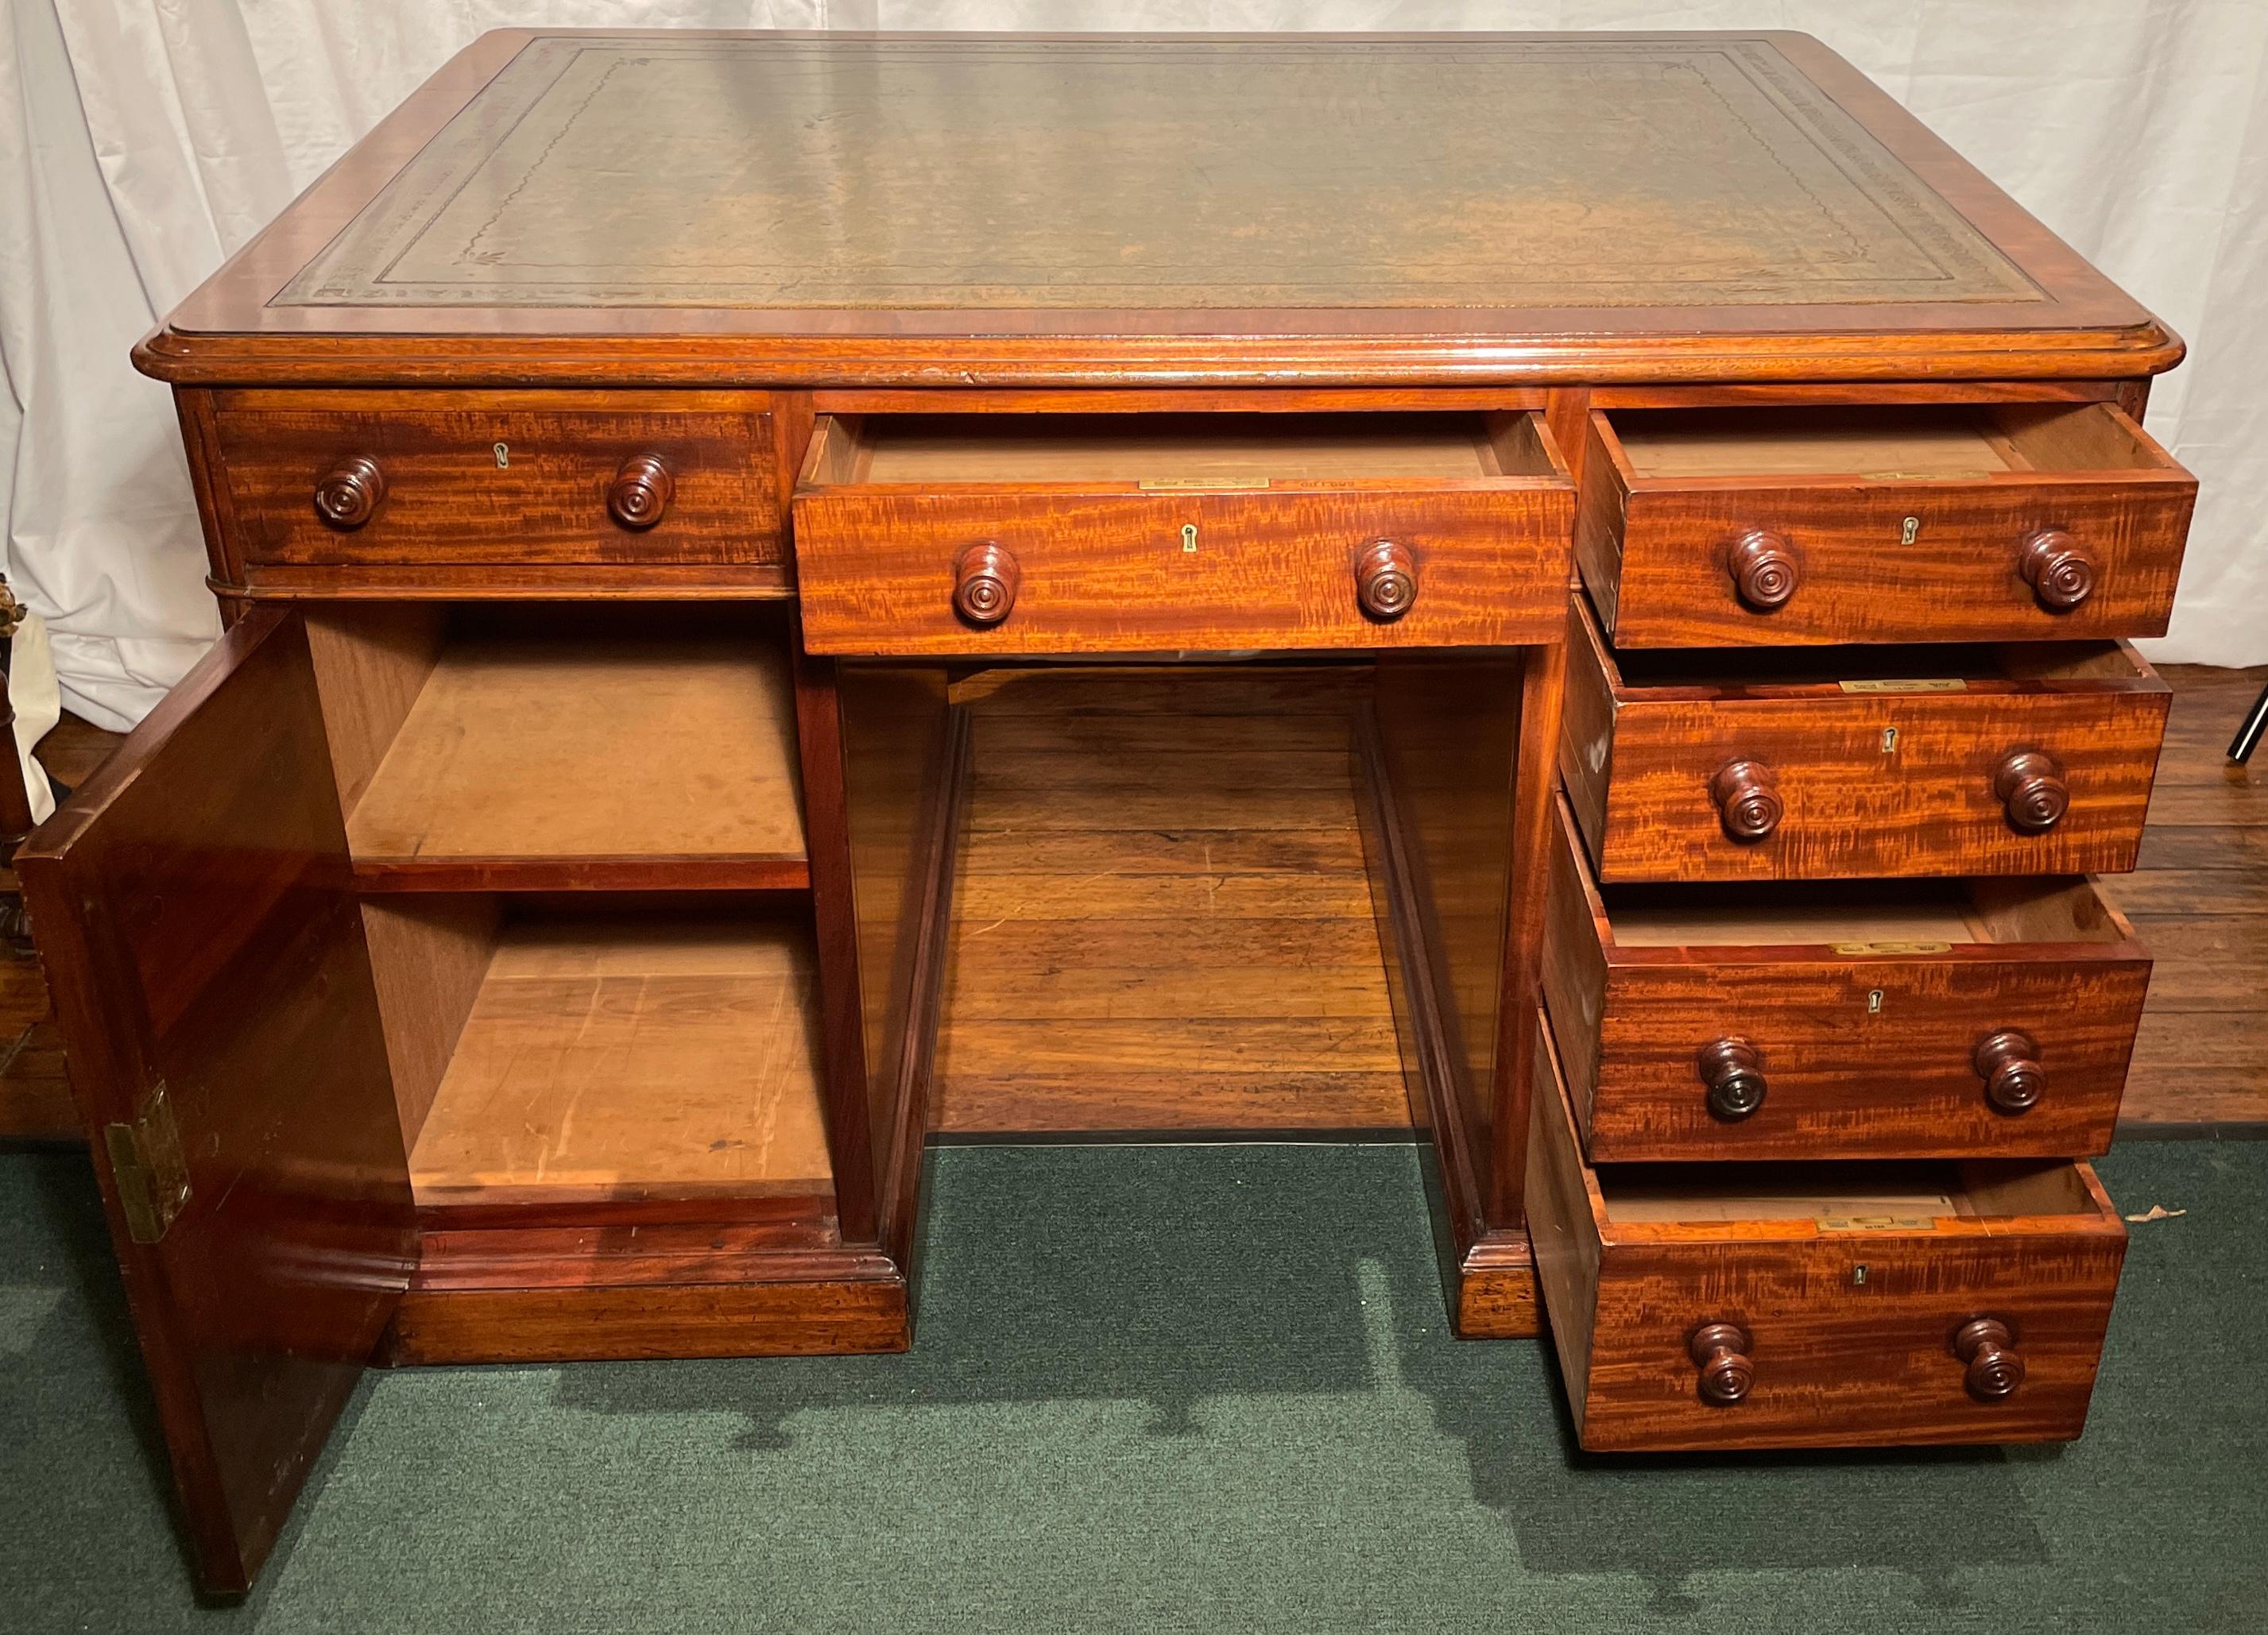 Antique English Leather-Top Mahogany Partner's Desk, Circa 1880 In Good Condition For Sale In New Orleans, LA